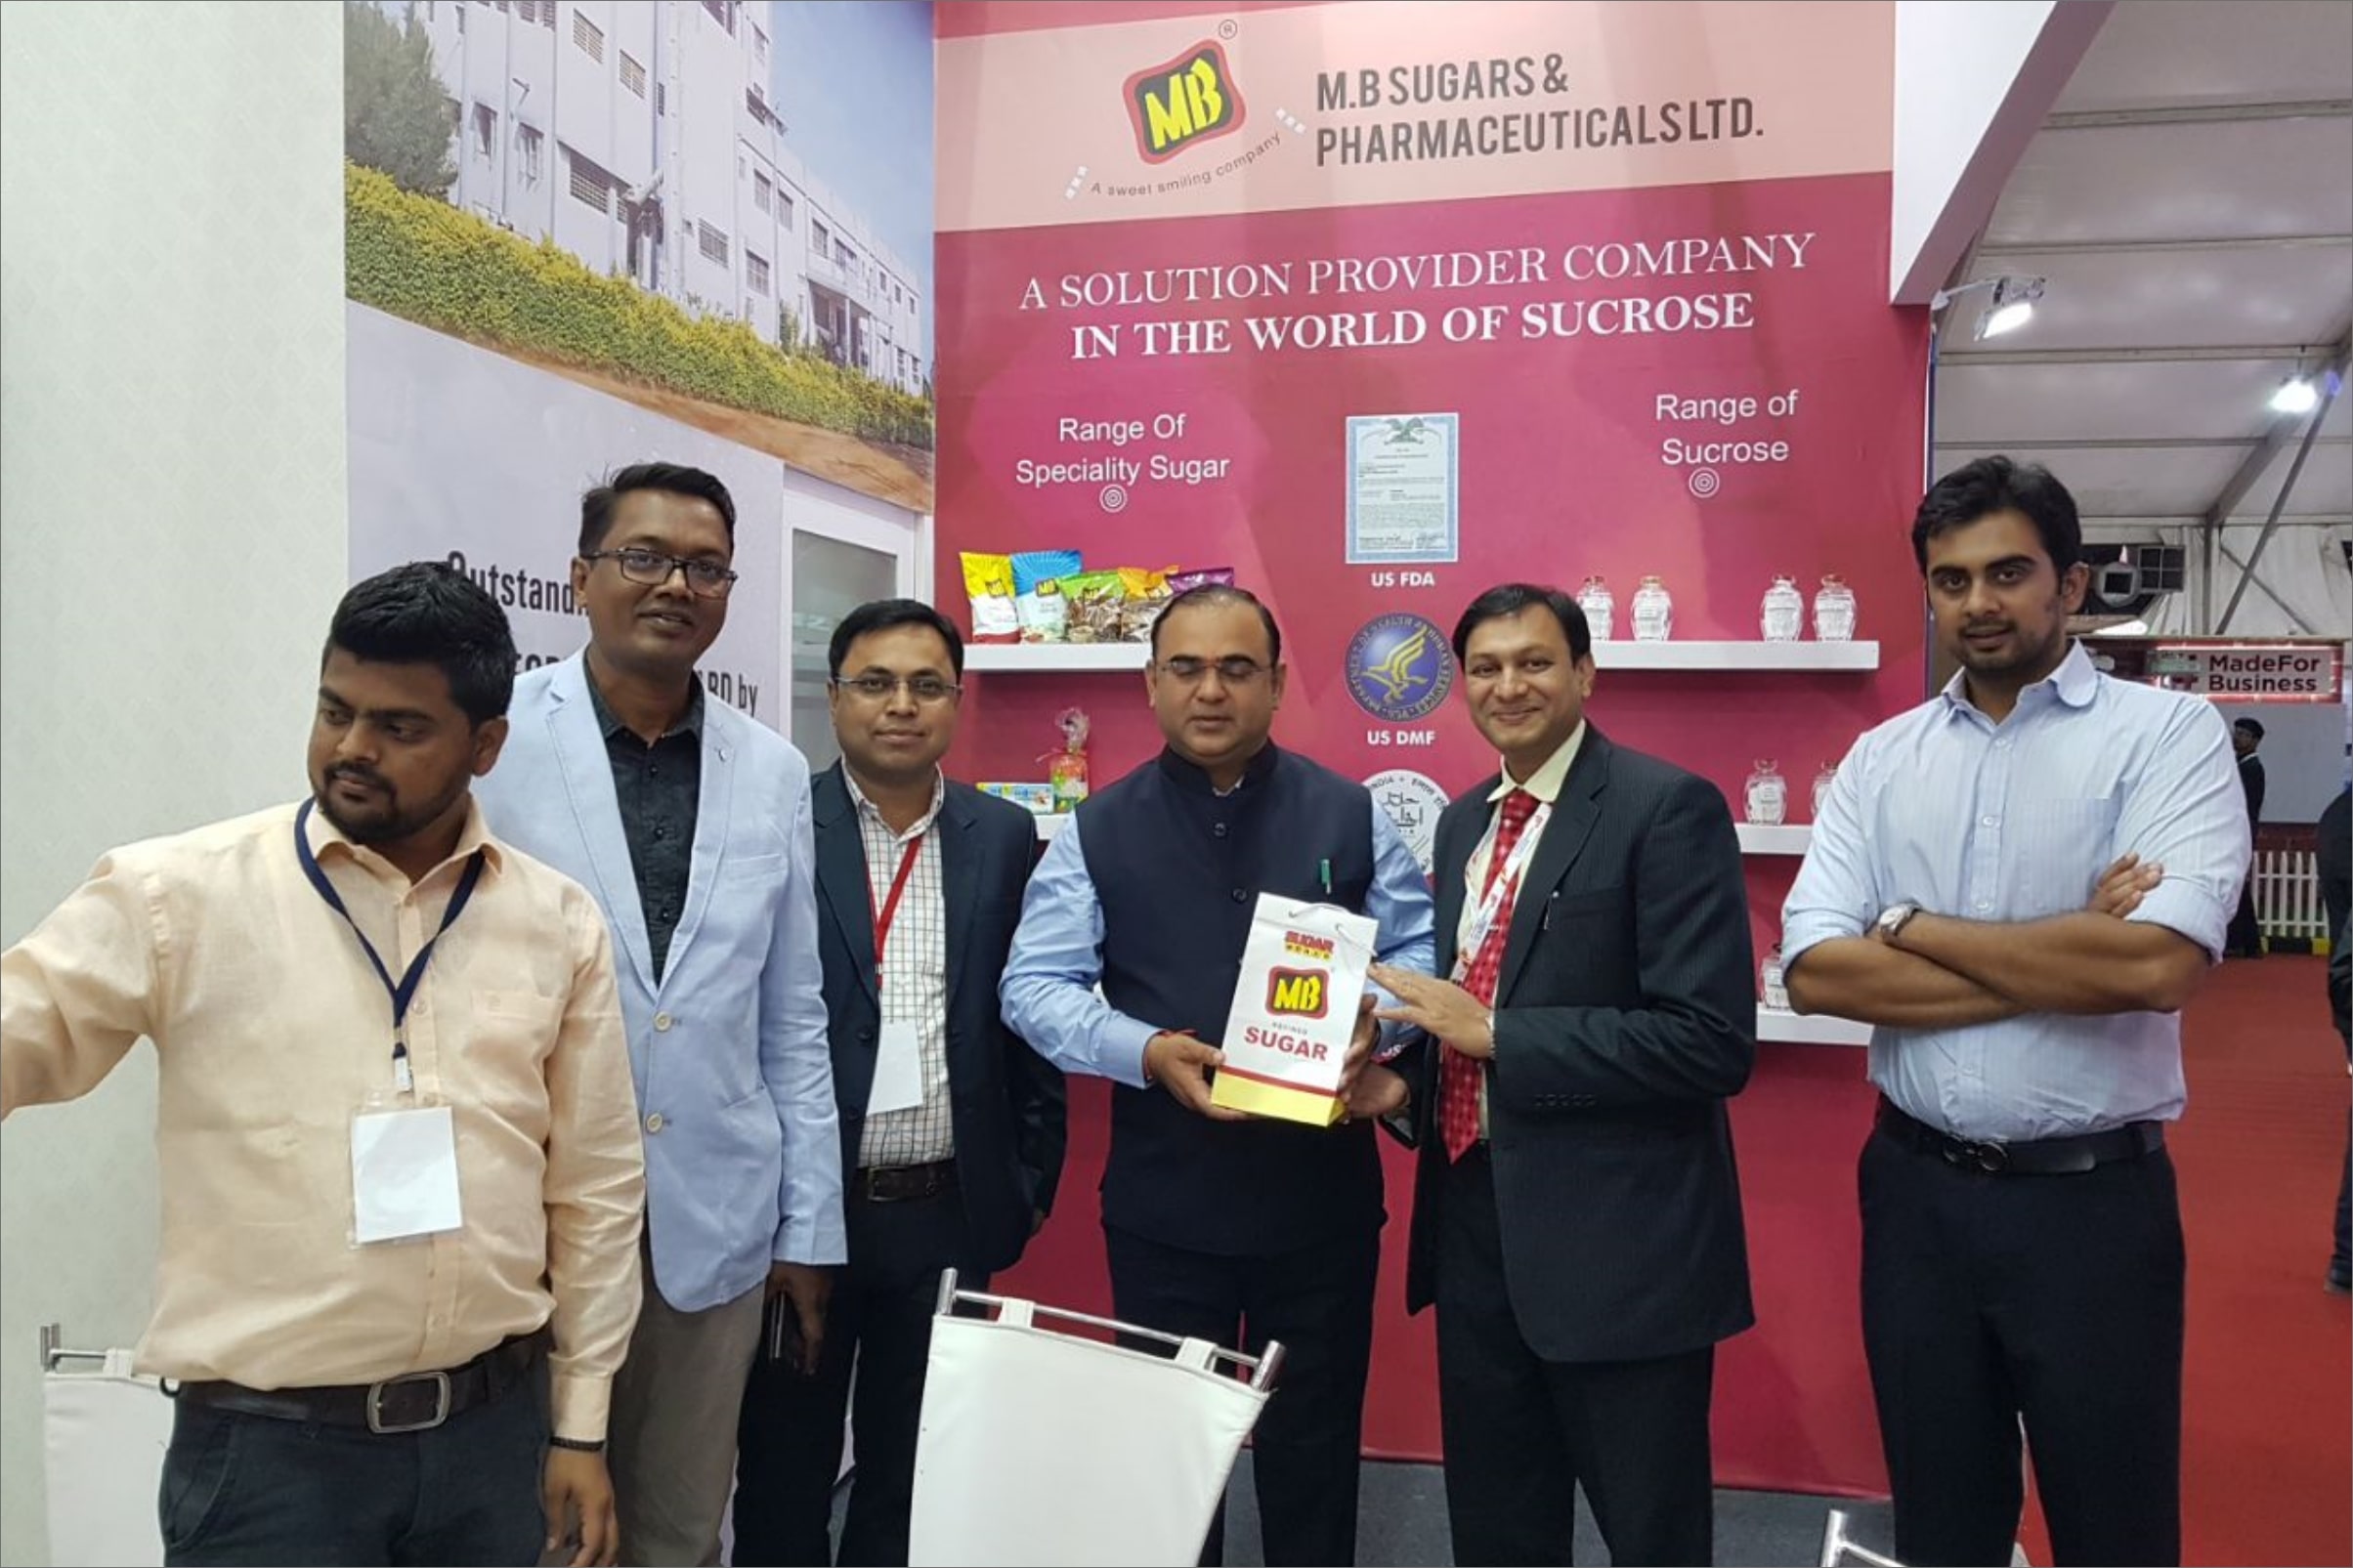 Hon'ble Minister of truism Mr. Jayakumar Rawal visited  MB Sugars & Pharmaceuticals Ltd. stall at the exhibition Organized by Ministry of Commerce and Industry  (Maharashtra) in year 2018